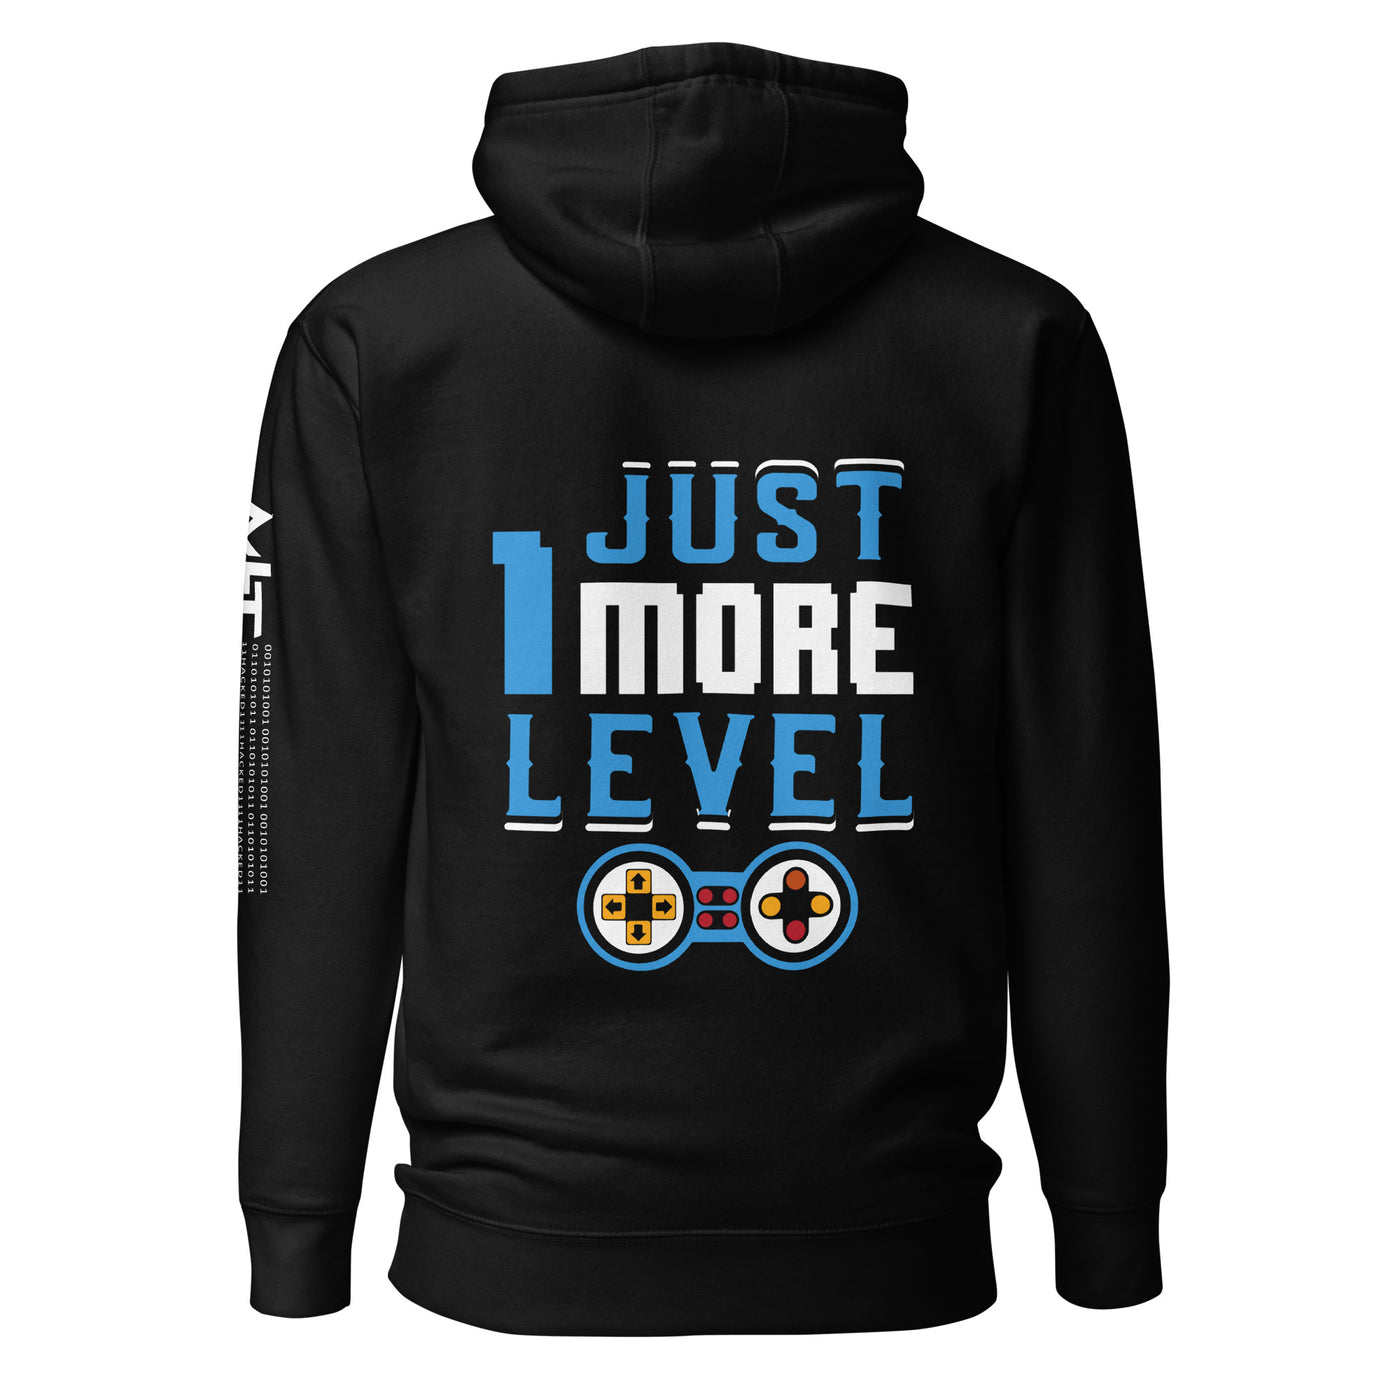 Just 1 More Level - Unisex Hoodie ( Back Print )